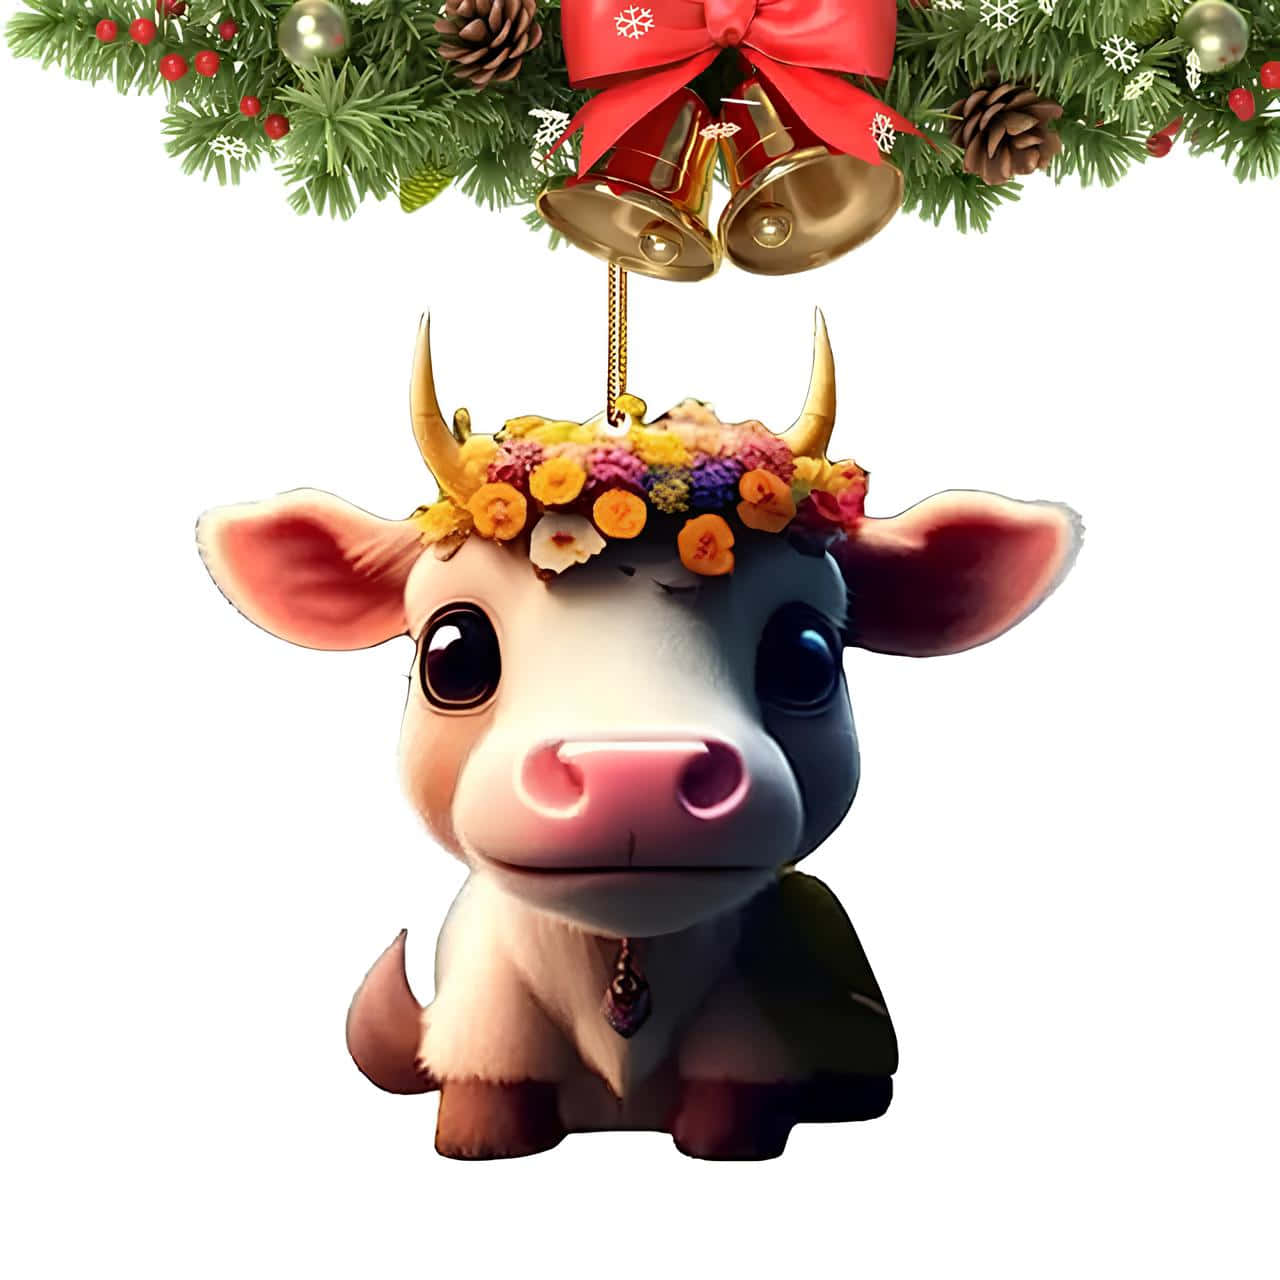 Christmas Cow With Holiday Decorations.jpg Wallpaper